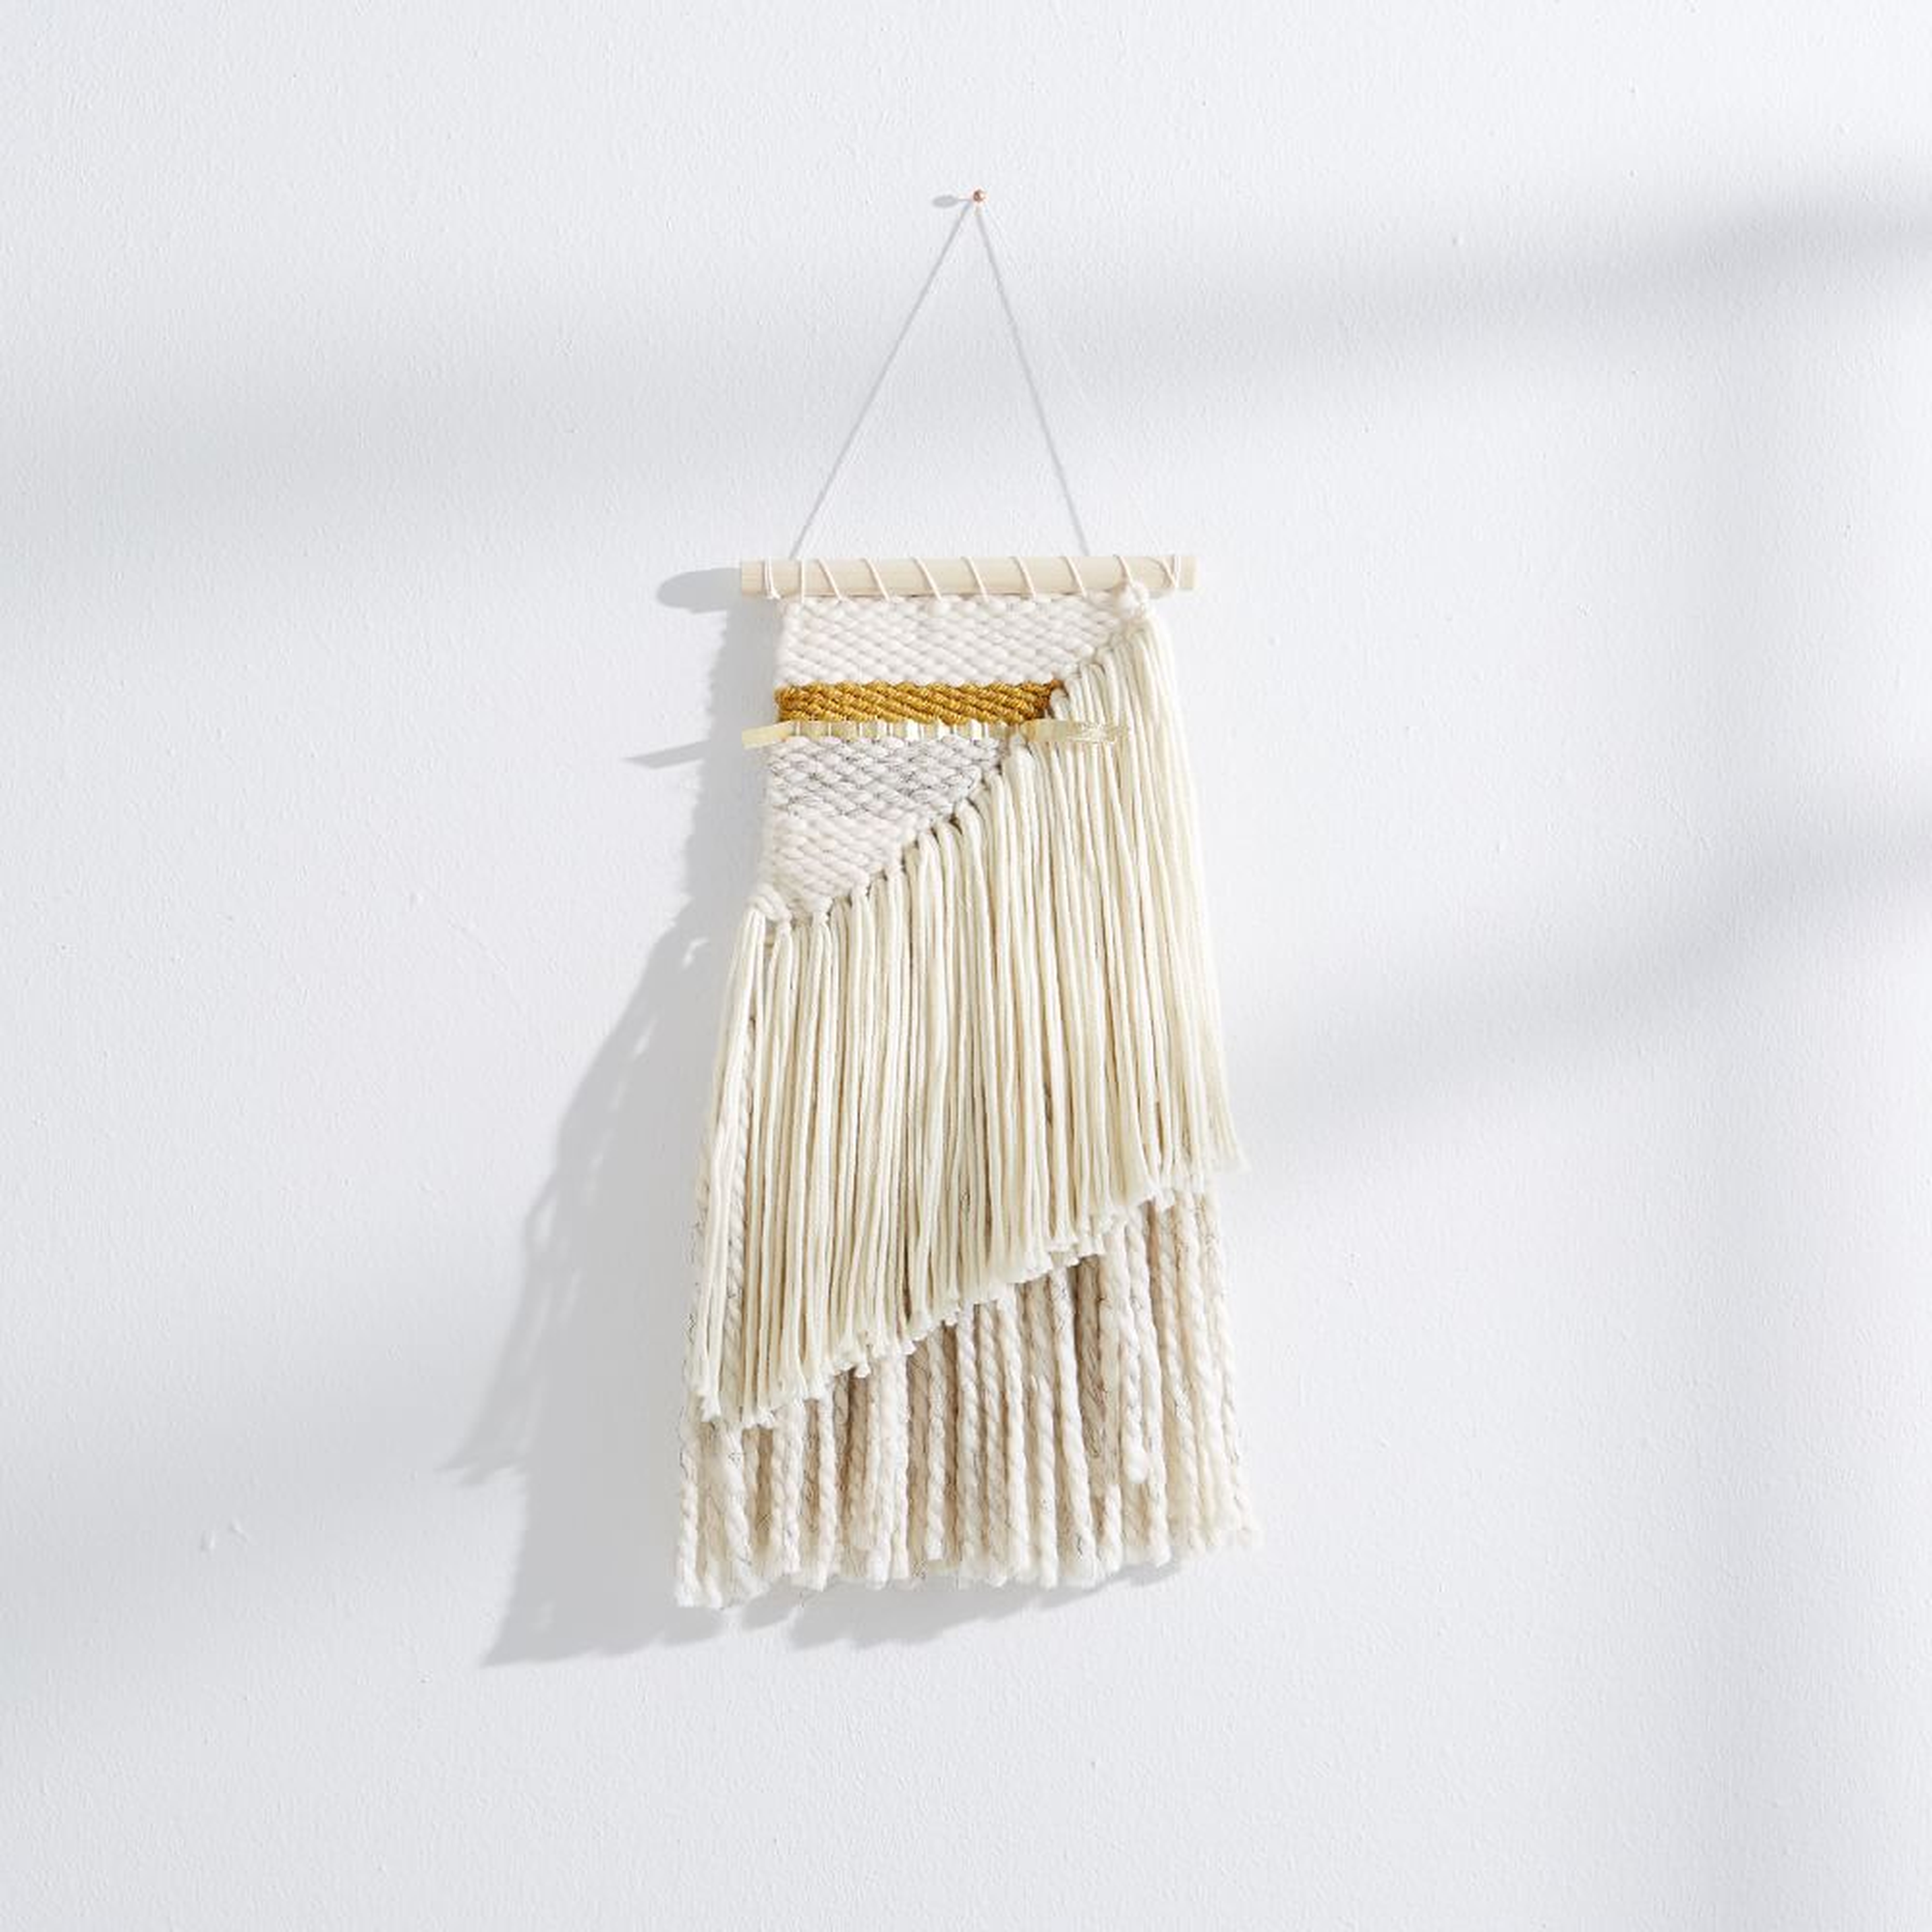 Sun Woven Wall Hanging, Small, Ivory/Mustard/Gold - West Elm